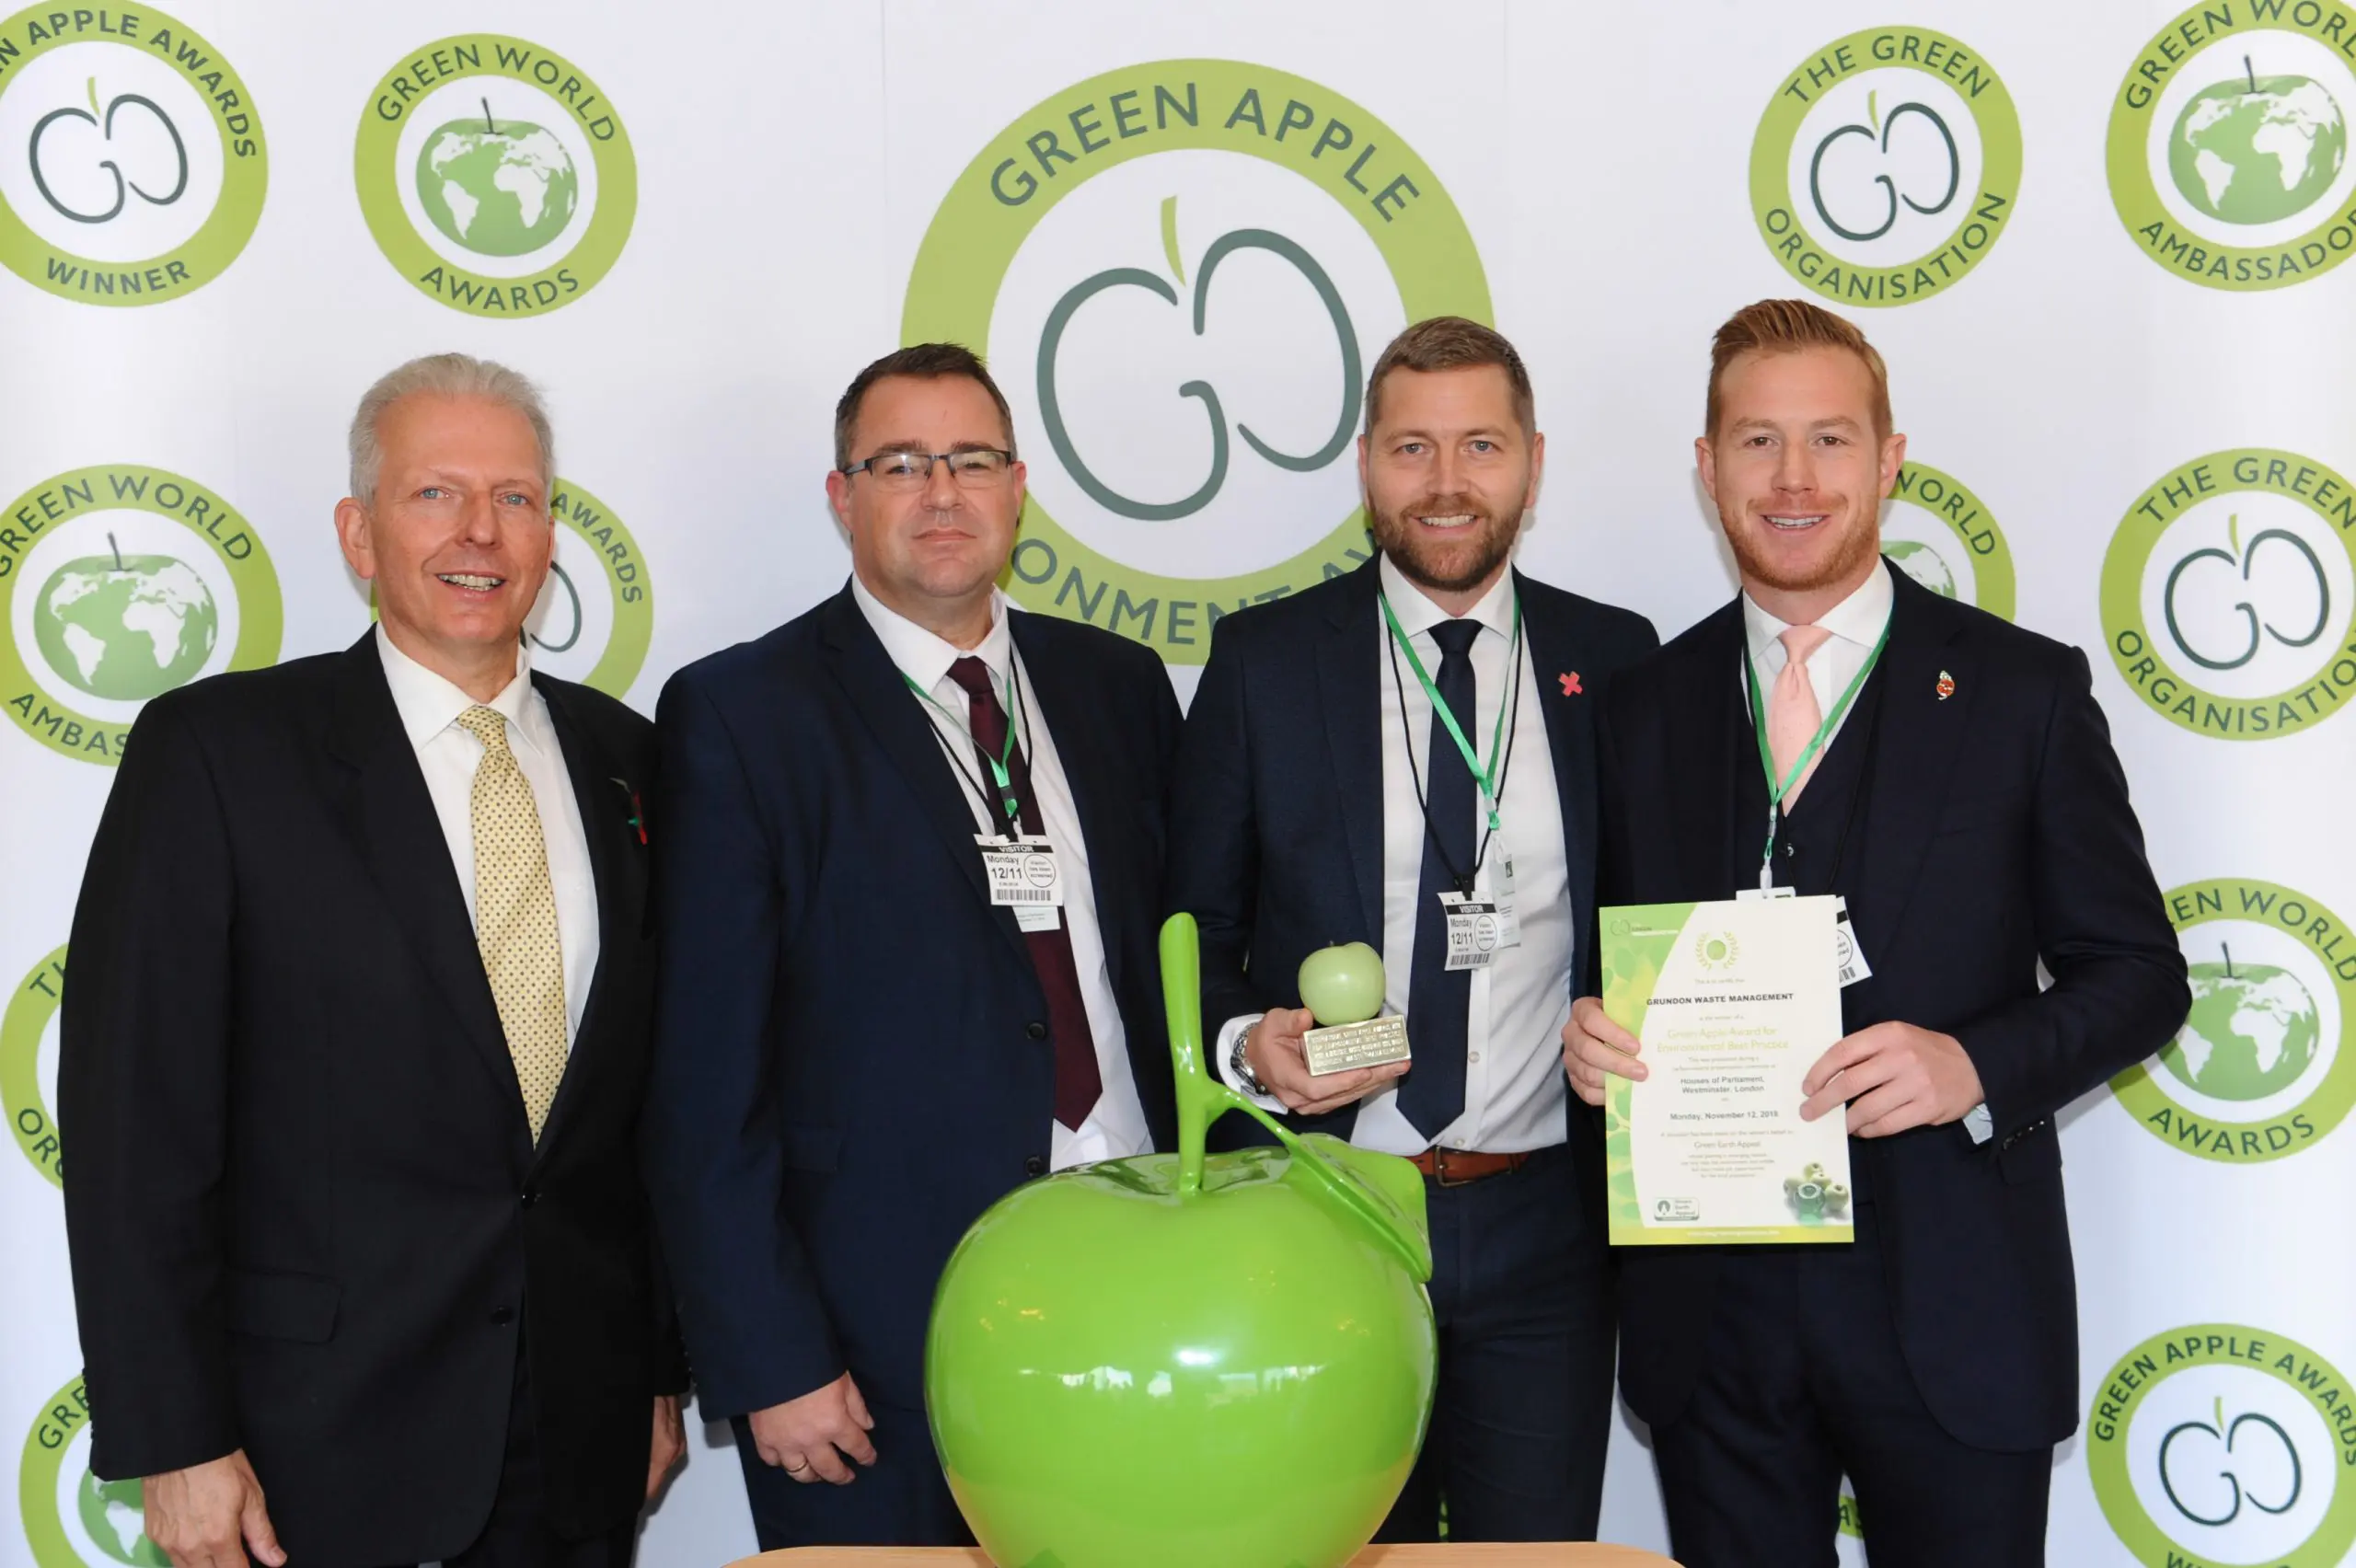 Gold standard: (from second left) Mark Peasley, Contract Manager at Grundon; Carl Meale, General Manager at Savills; and Stephen Hill, Head of Sales at Grundon, celebrate Xscape Milton Keynes taking top honours in the Retail and Wholesale Wastes Management category at the Green Apple Awards.